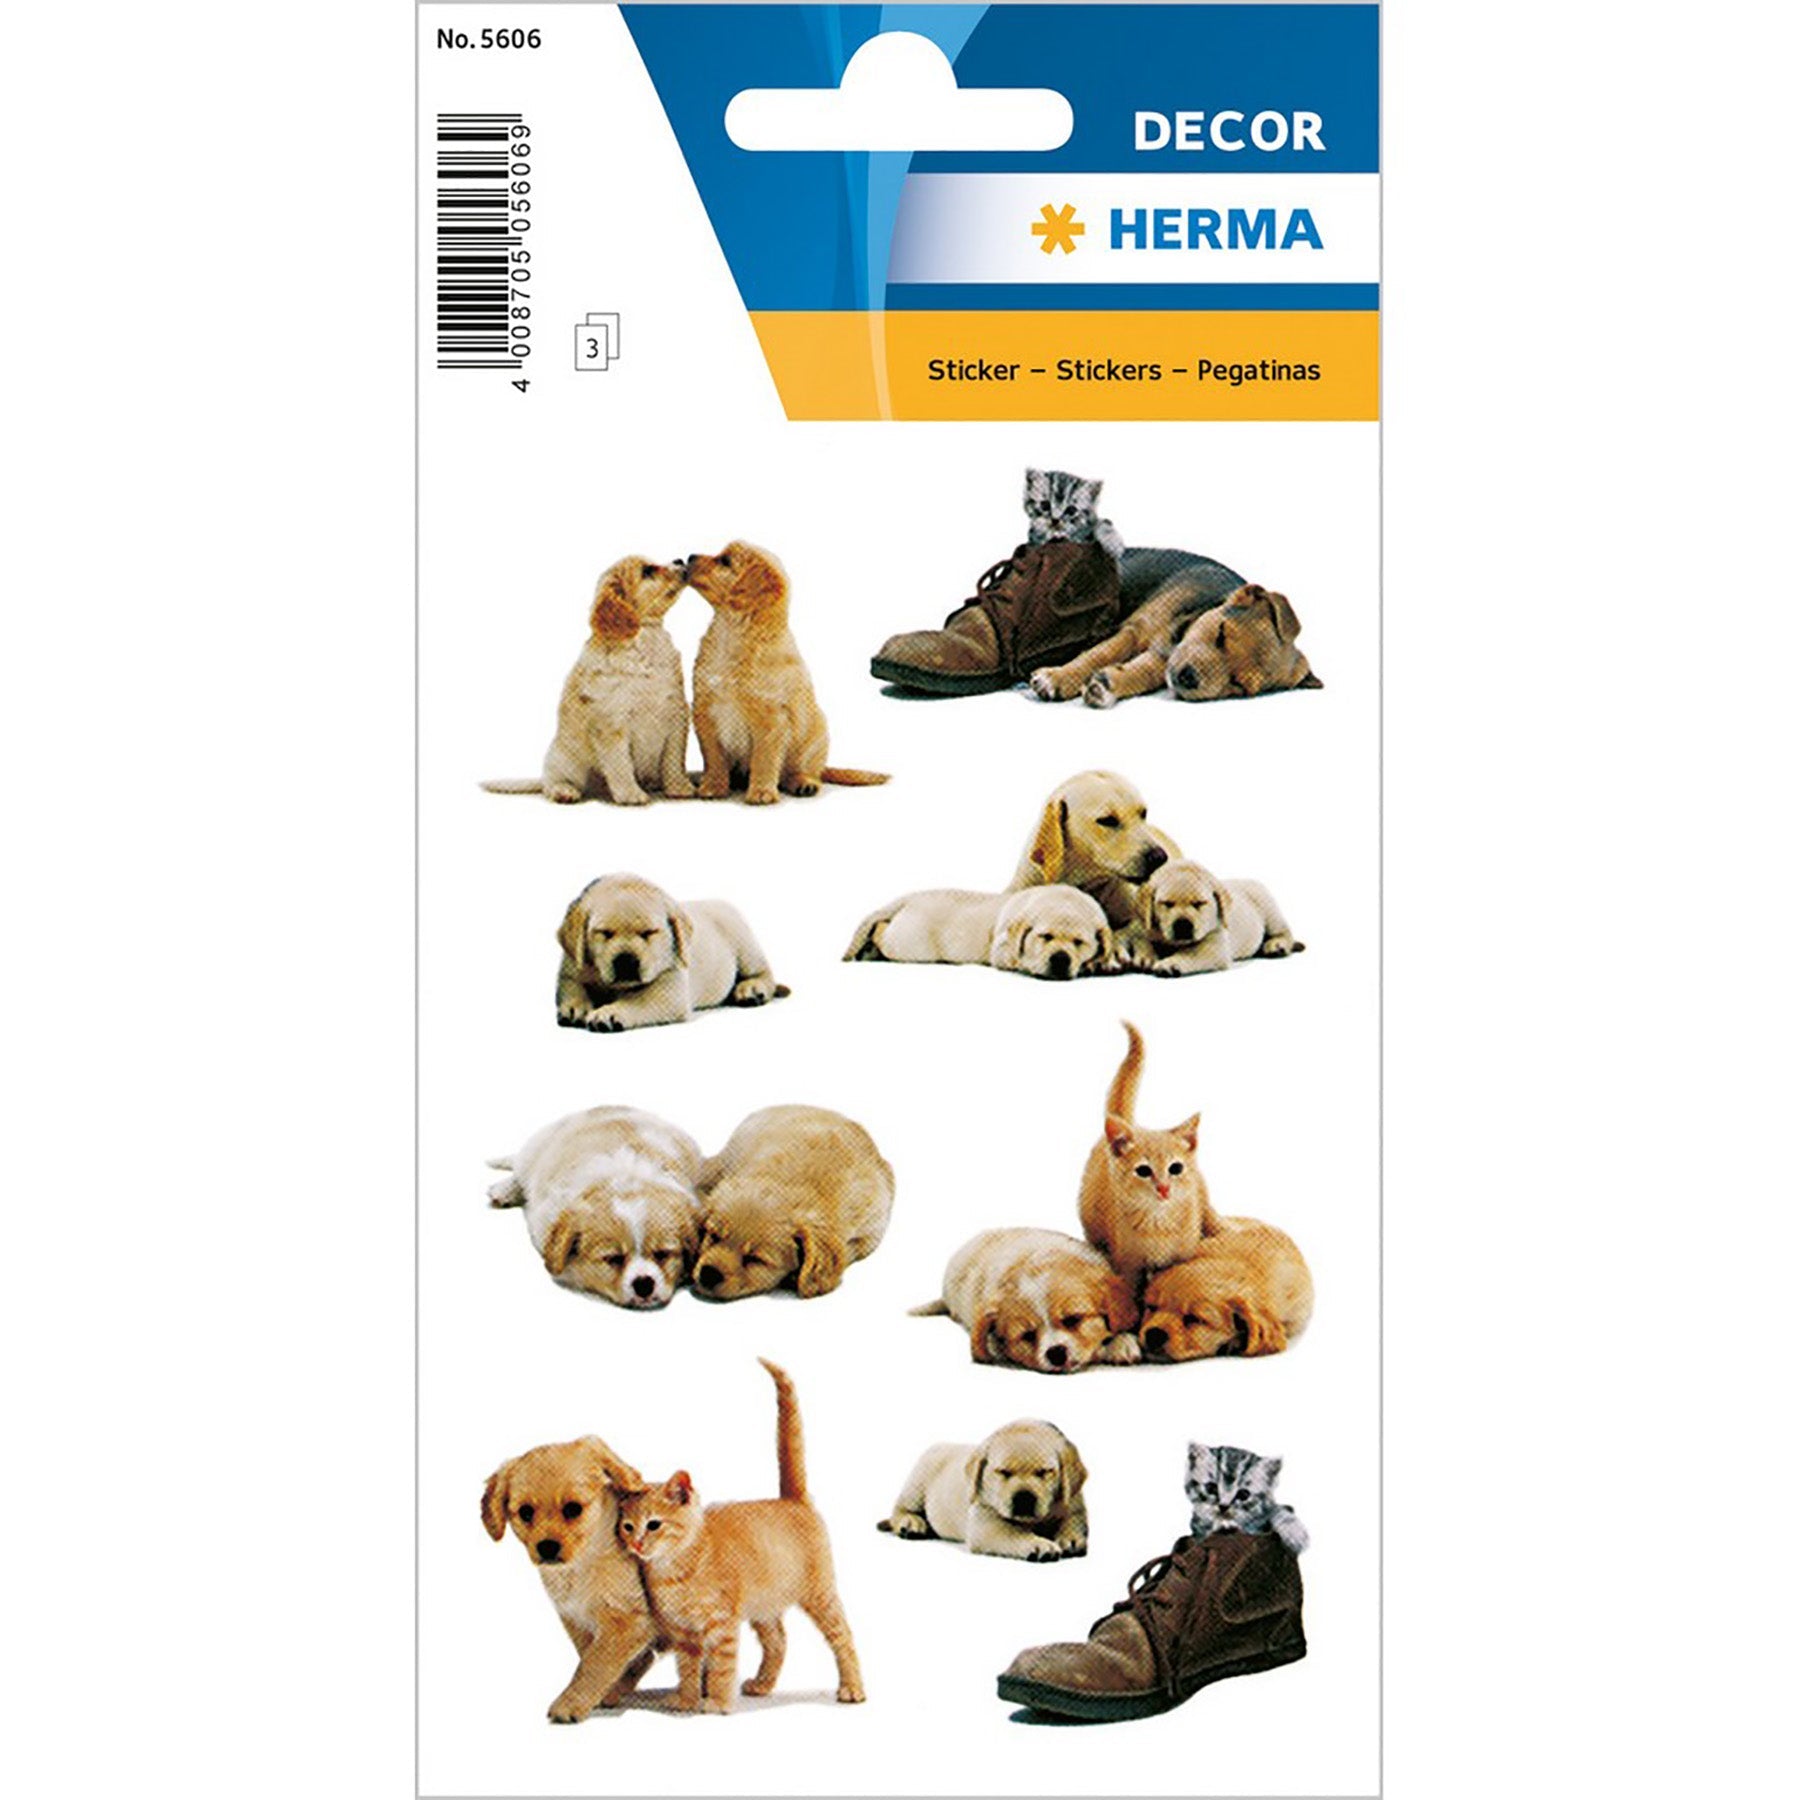 Herma Decor 3 Sheets Stickers Whelps 4.75x3.1in Sheet